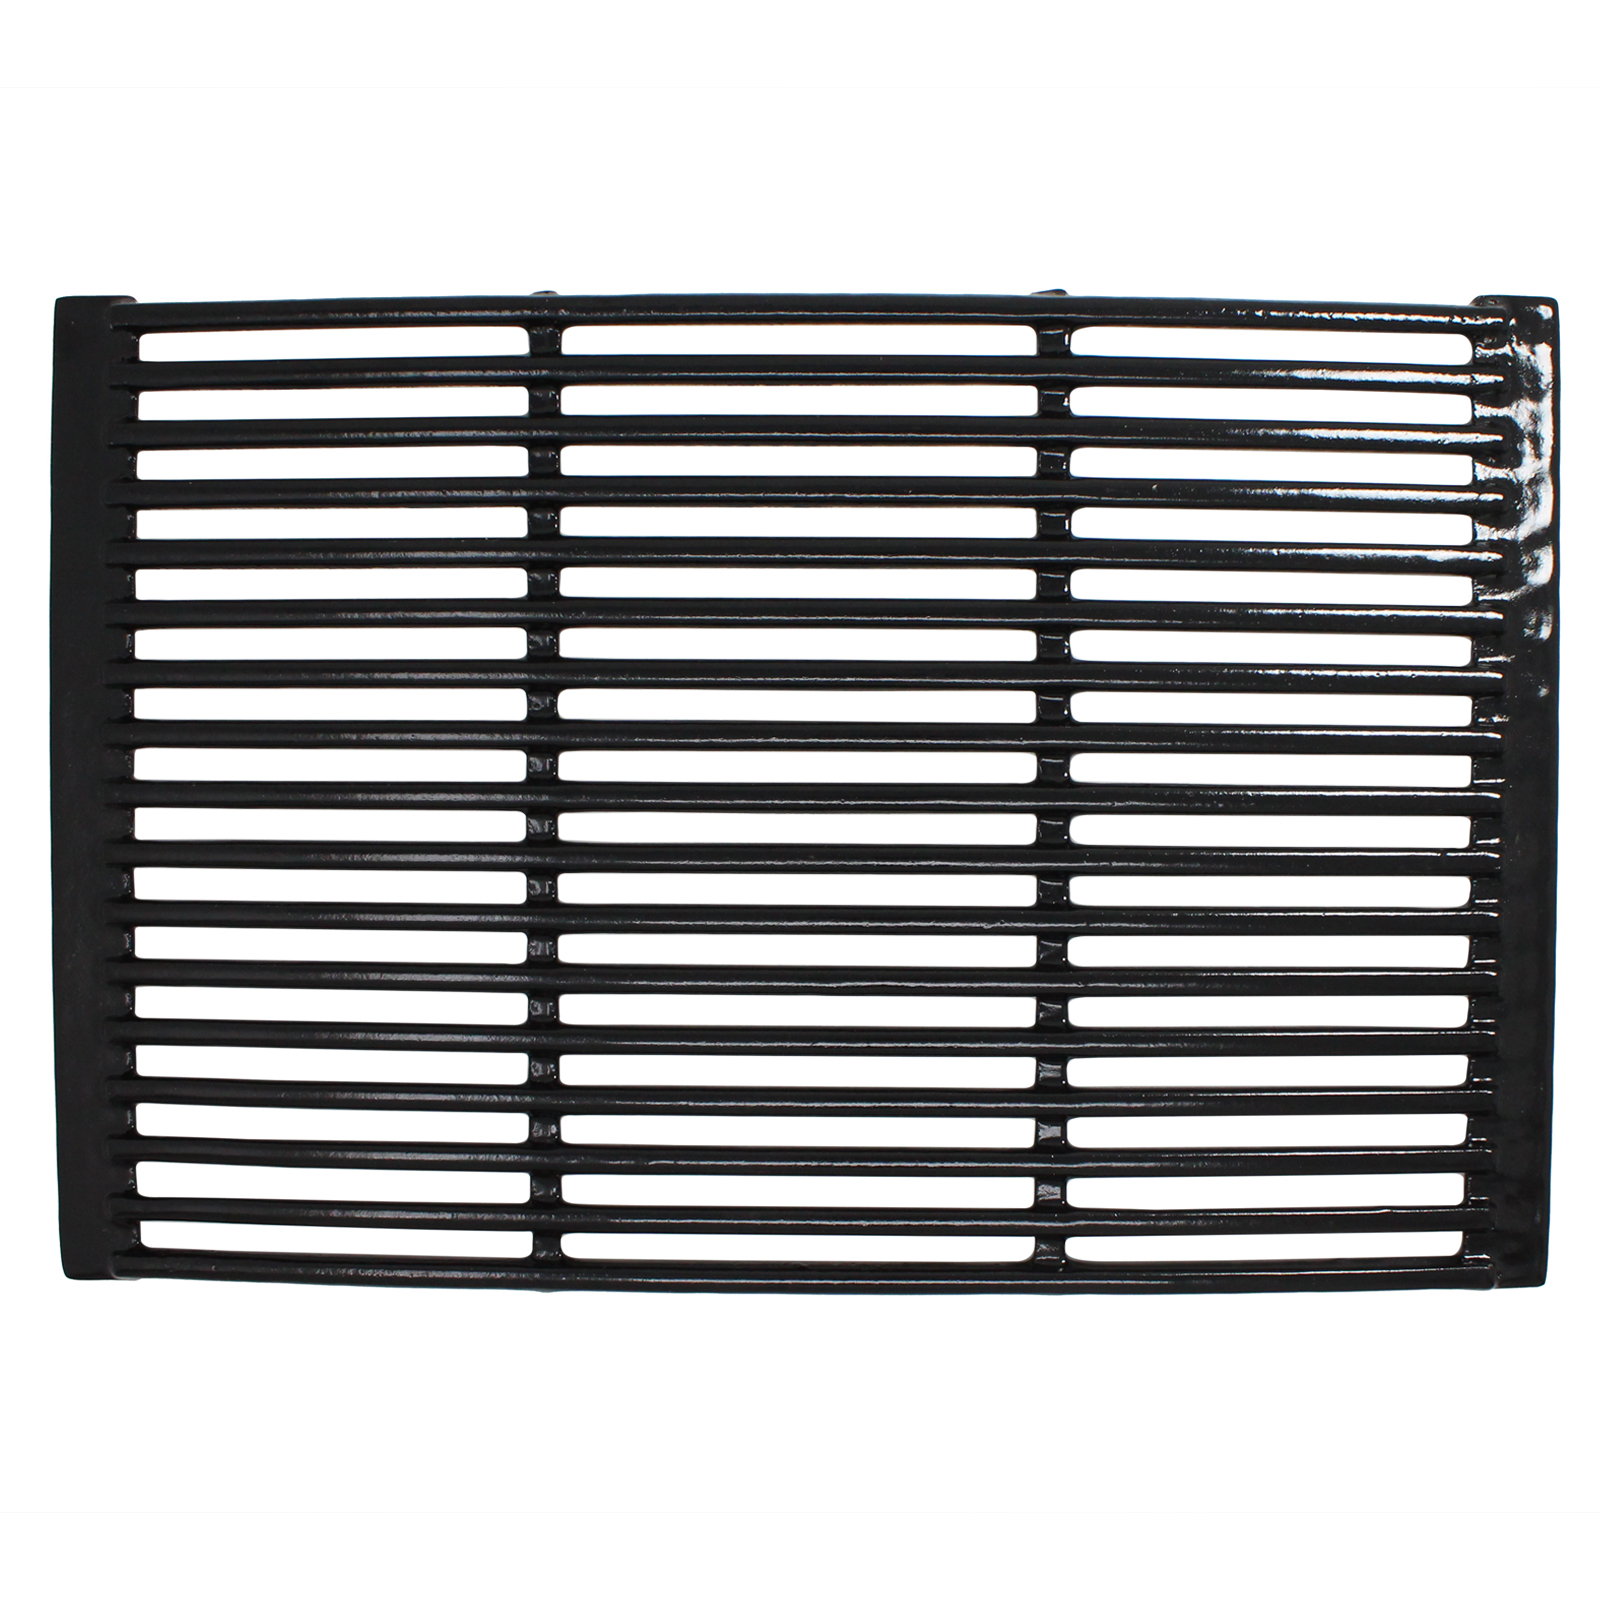 2-Pack BBQ Grill Cooking Grates Replacement Parts for Brinkmann 2400 - Compatible Barbeque Porcelain Enameled Cast Iron Grid 19" - image 4 of 4